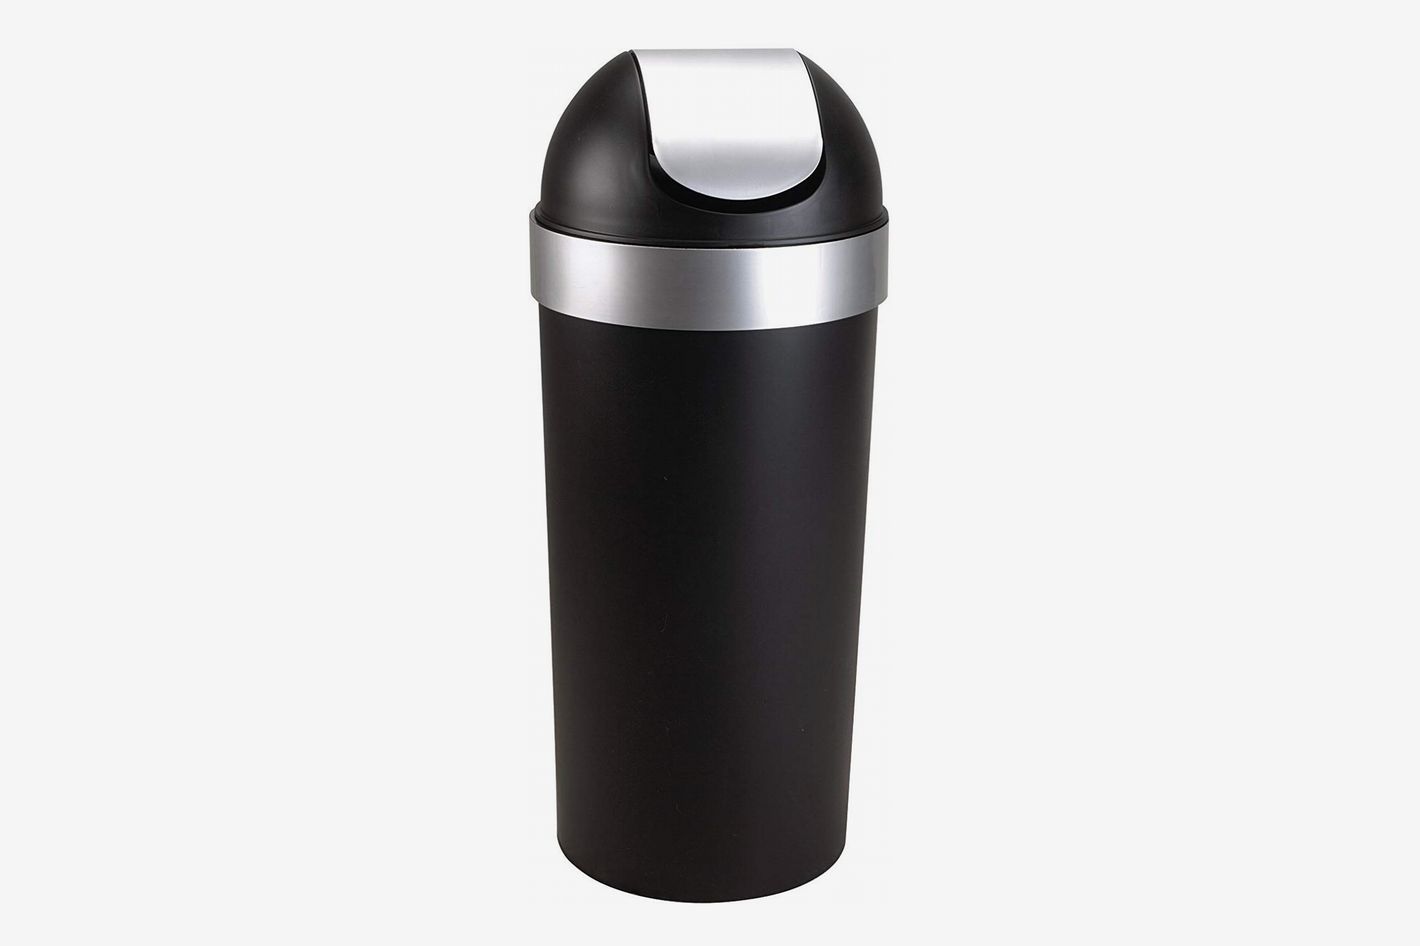 Super Random But… What is the BEST Trash Bin for a Standard 13